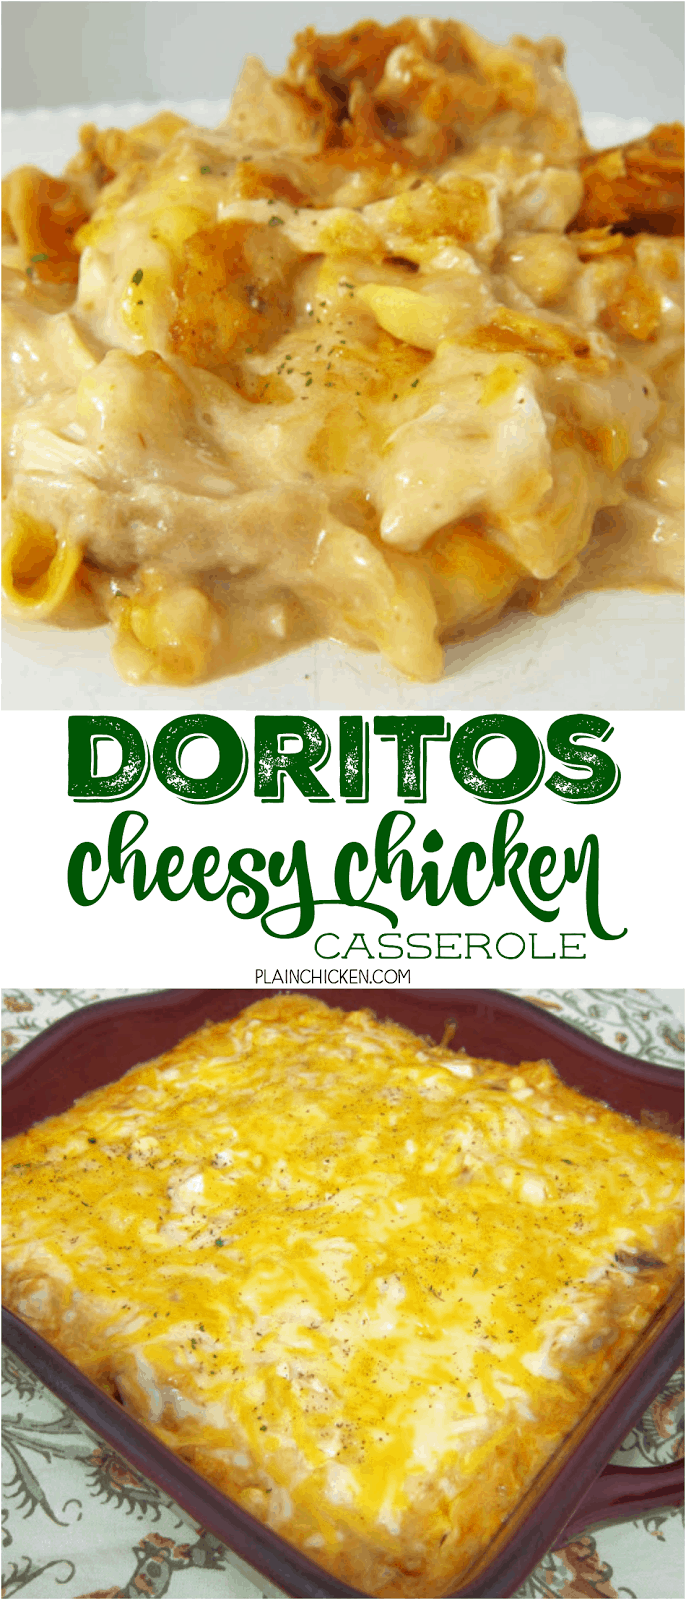 Doritos Cheesy Chicken Casserole - THE BEST Mexican casserole EVER! Chicken, sour cream cream of mushroom, cream of chicken, salsa, corn, cheese and Doritos! Everyone goes nuts over this casserole. Only takes a minute to assemble and it is ready to eat in 20 minutes. SO quick and easy. Great for a crowd - even picky eaters love this!